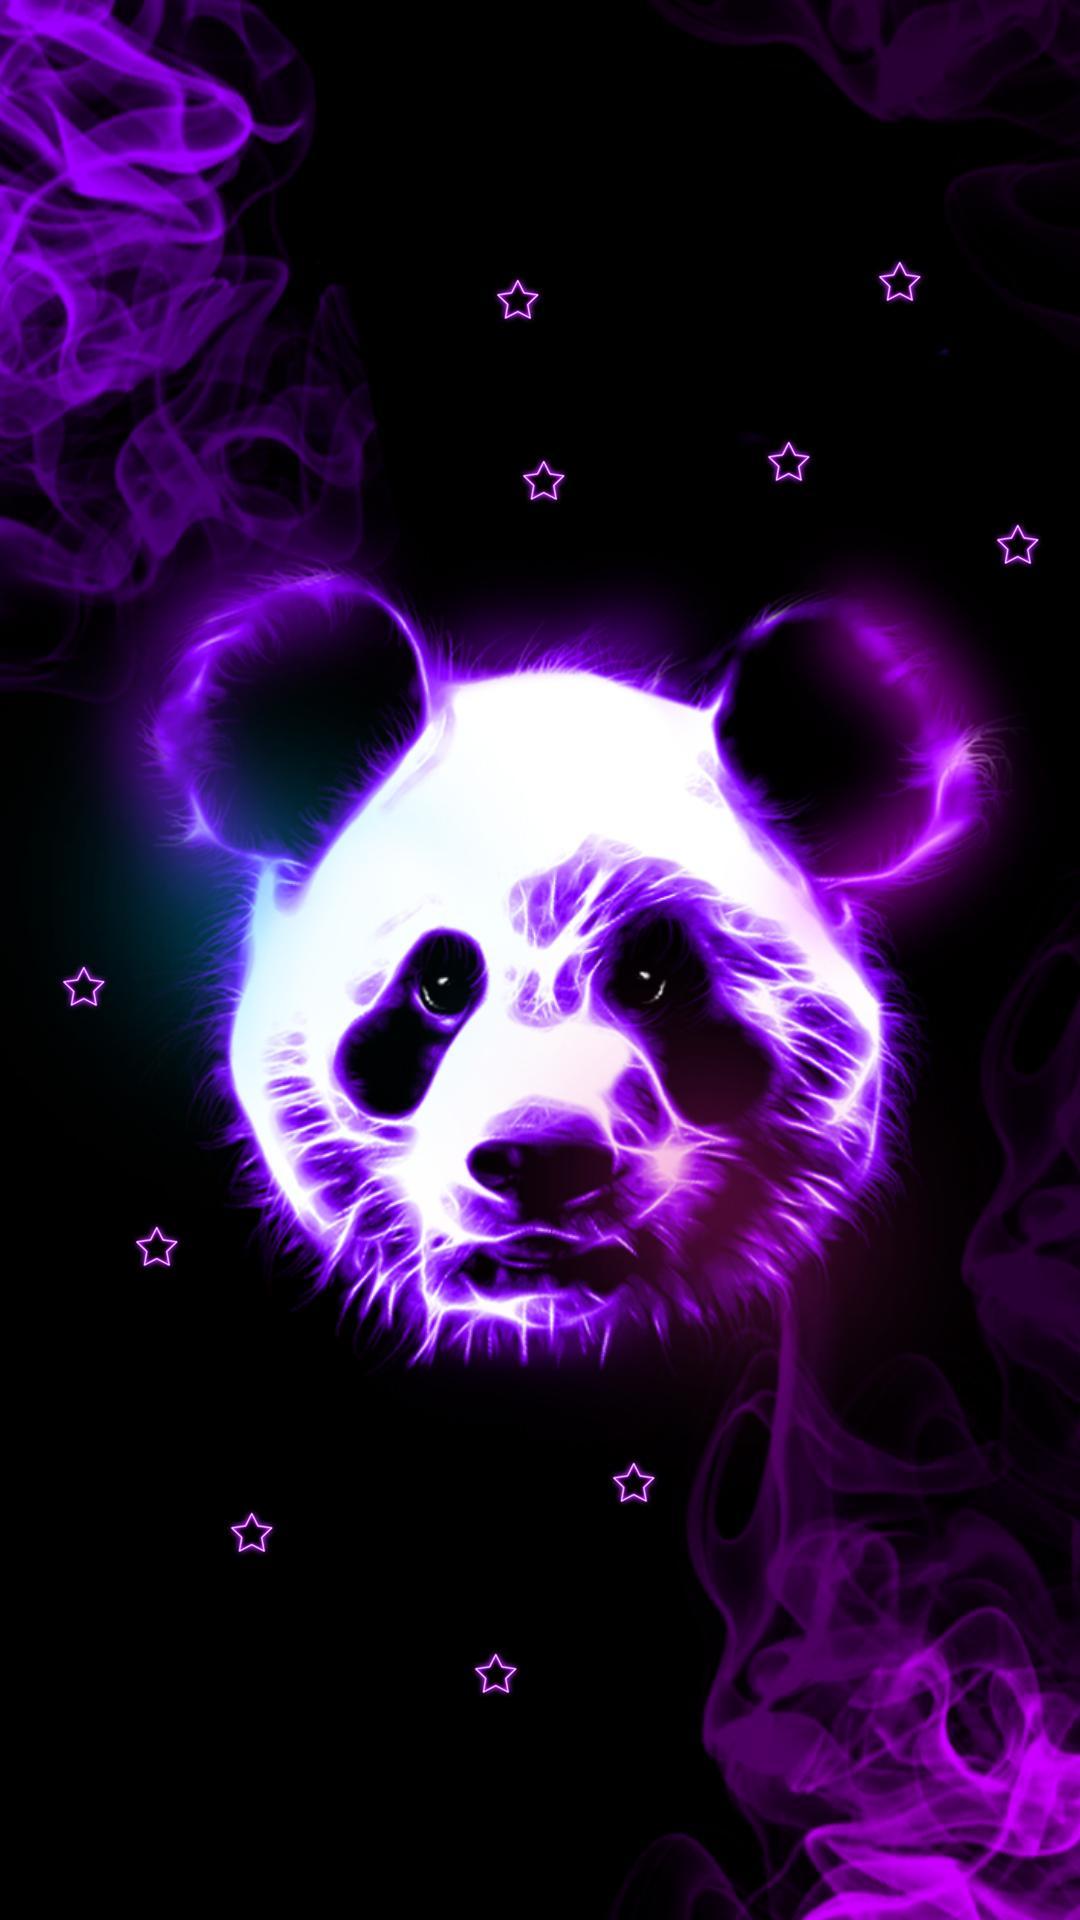 Neon Animal APUS Live Wallpaper for Android